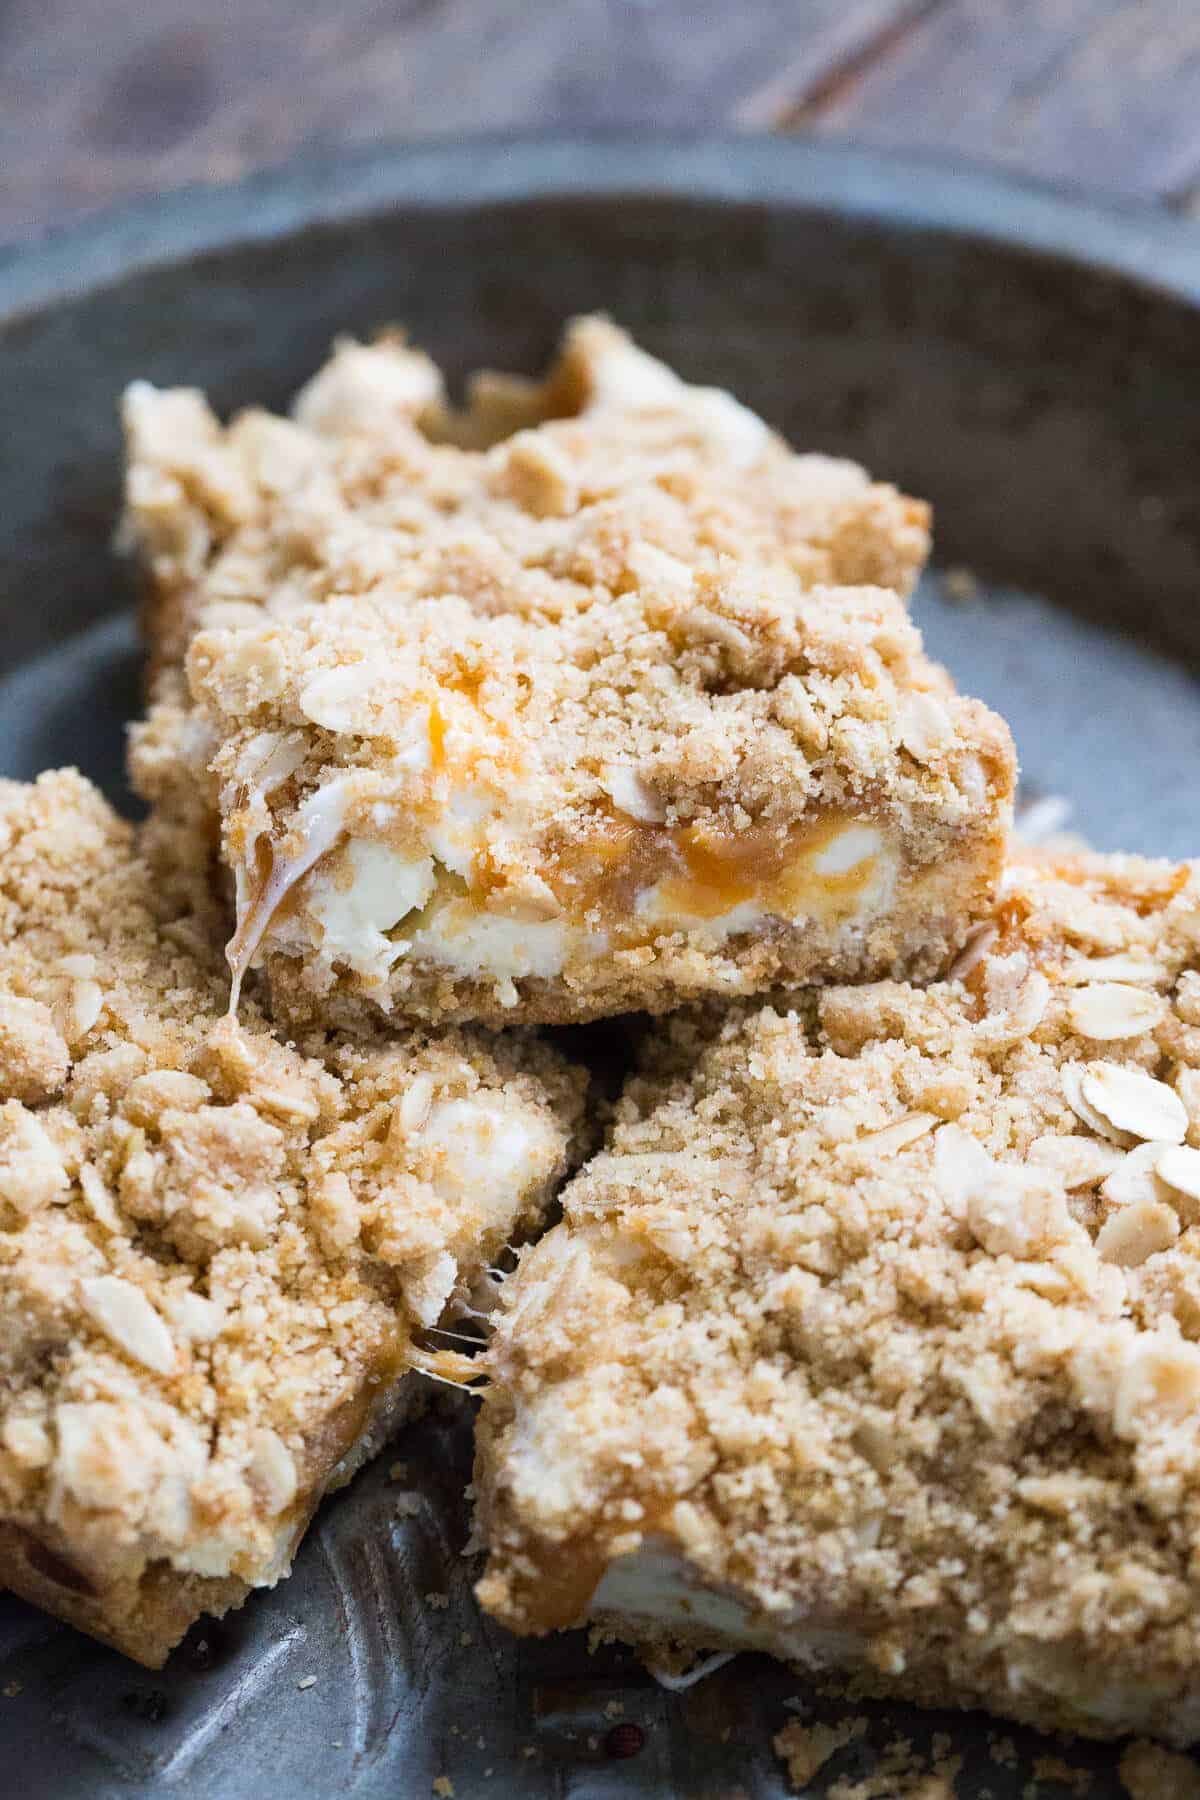 Caramel bars that have a caramel and peanut butter filling resting atop white chocolate chips. This combo is so amazing!